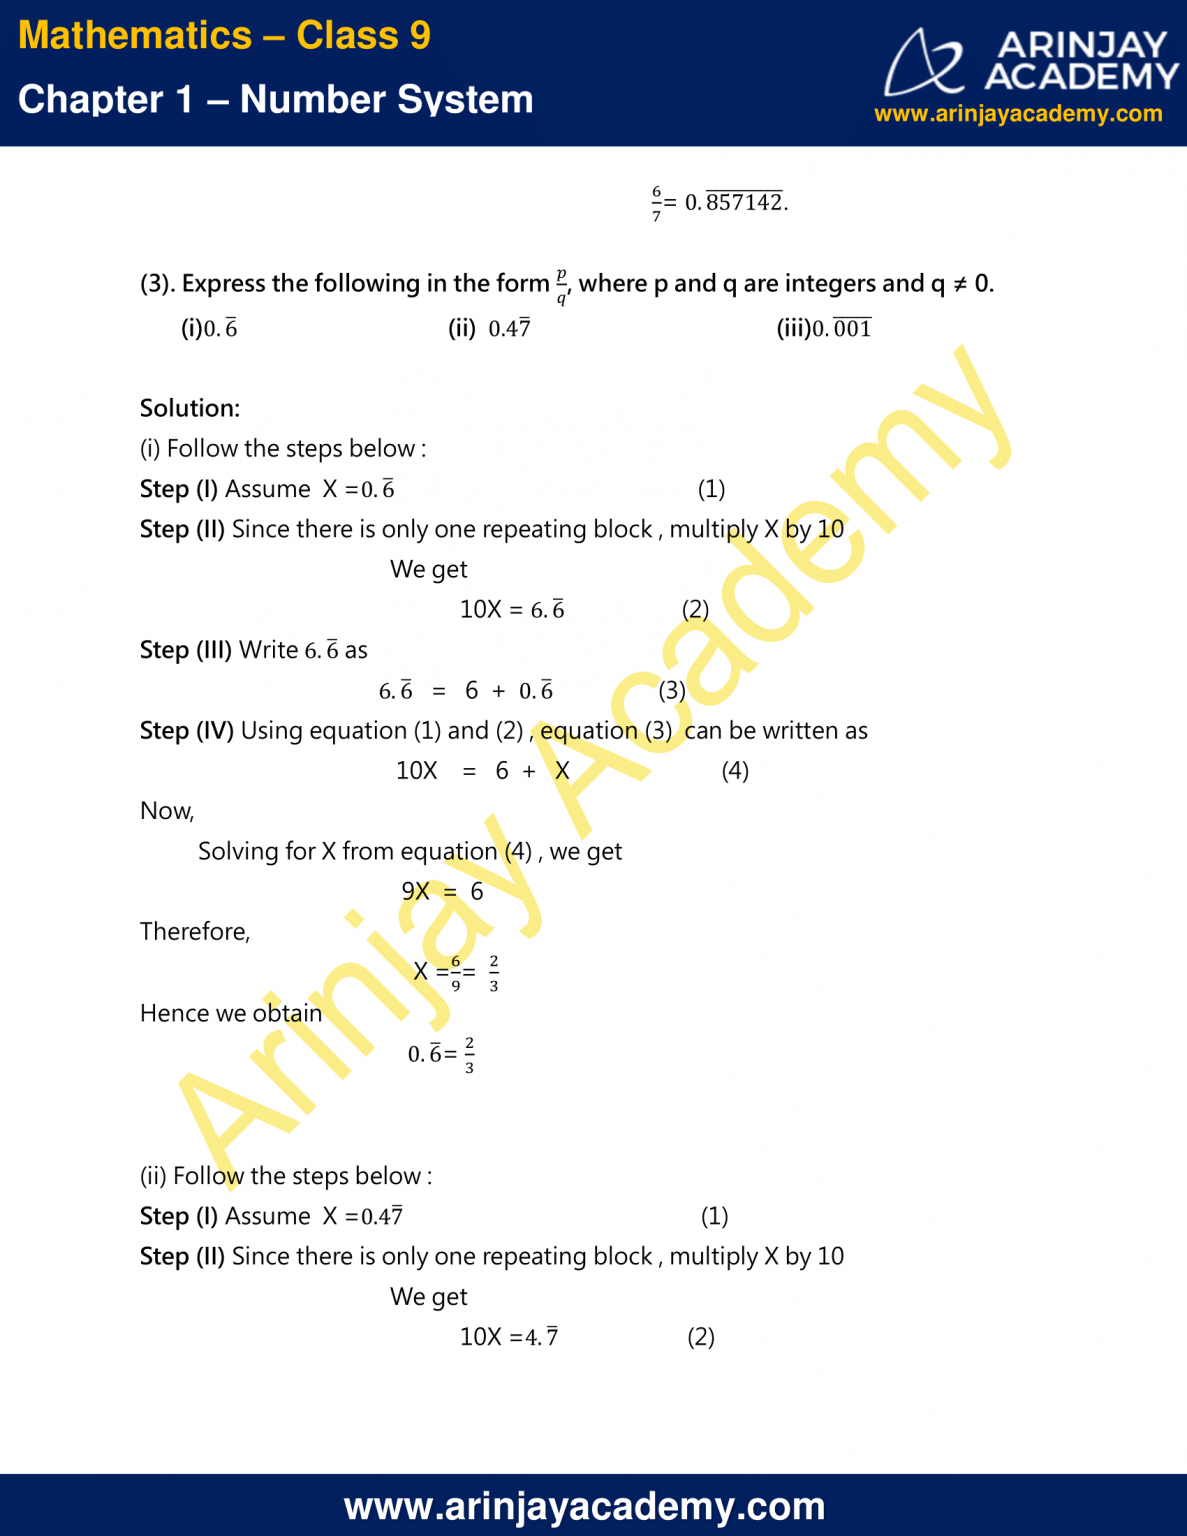 ncert-solutions-for-class-9-maths-chapter-1-exercise-1-3-number-system